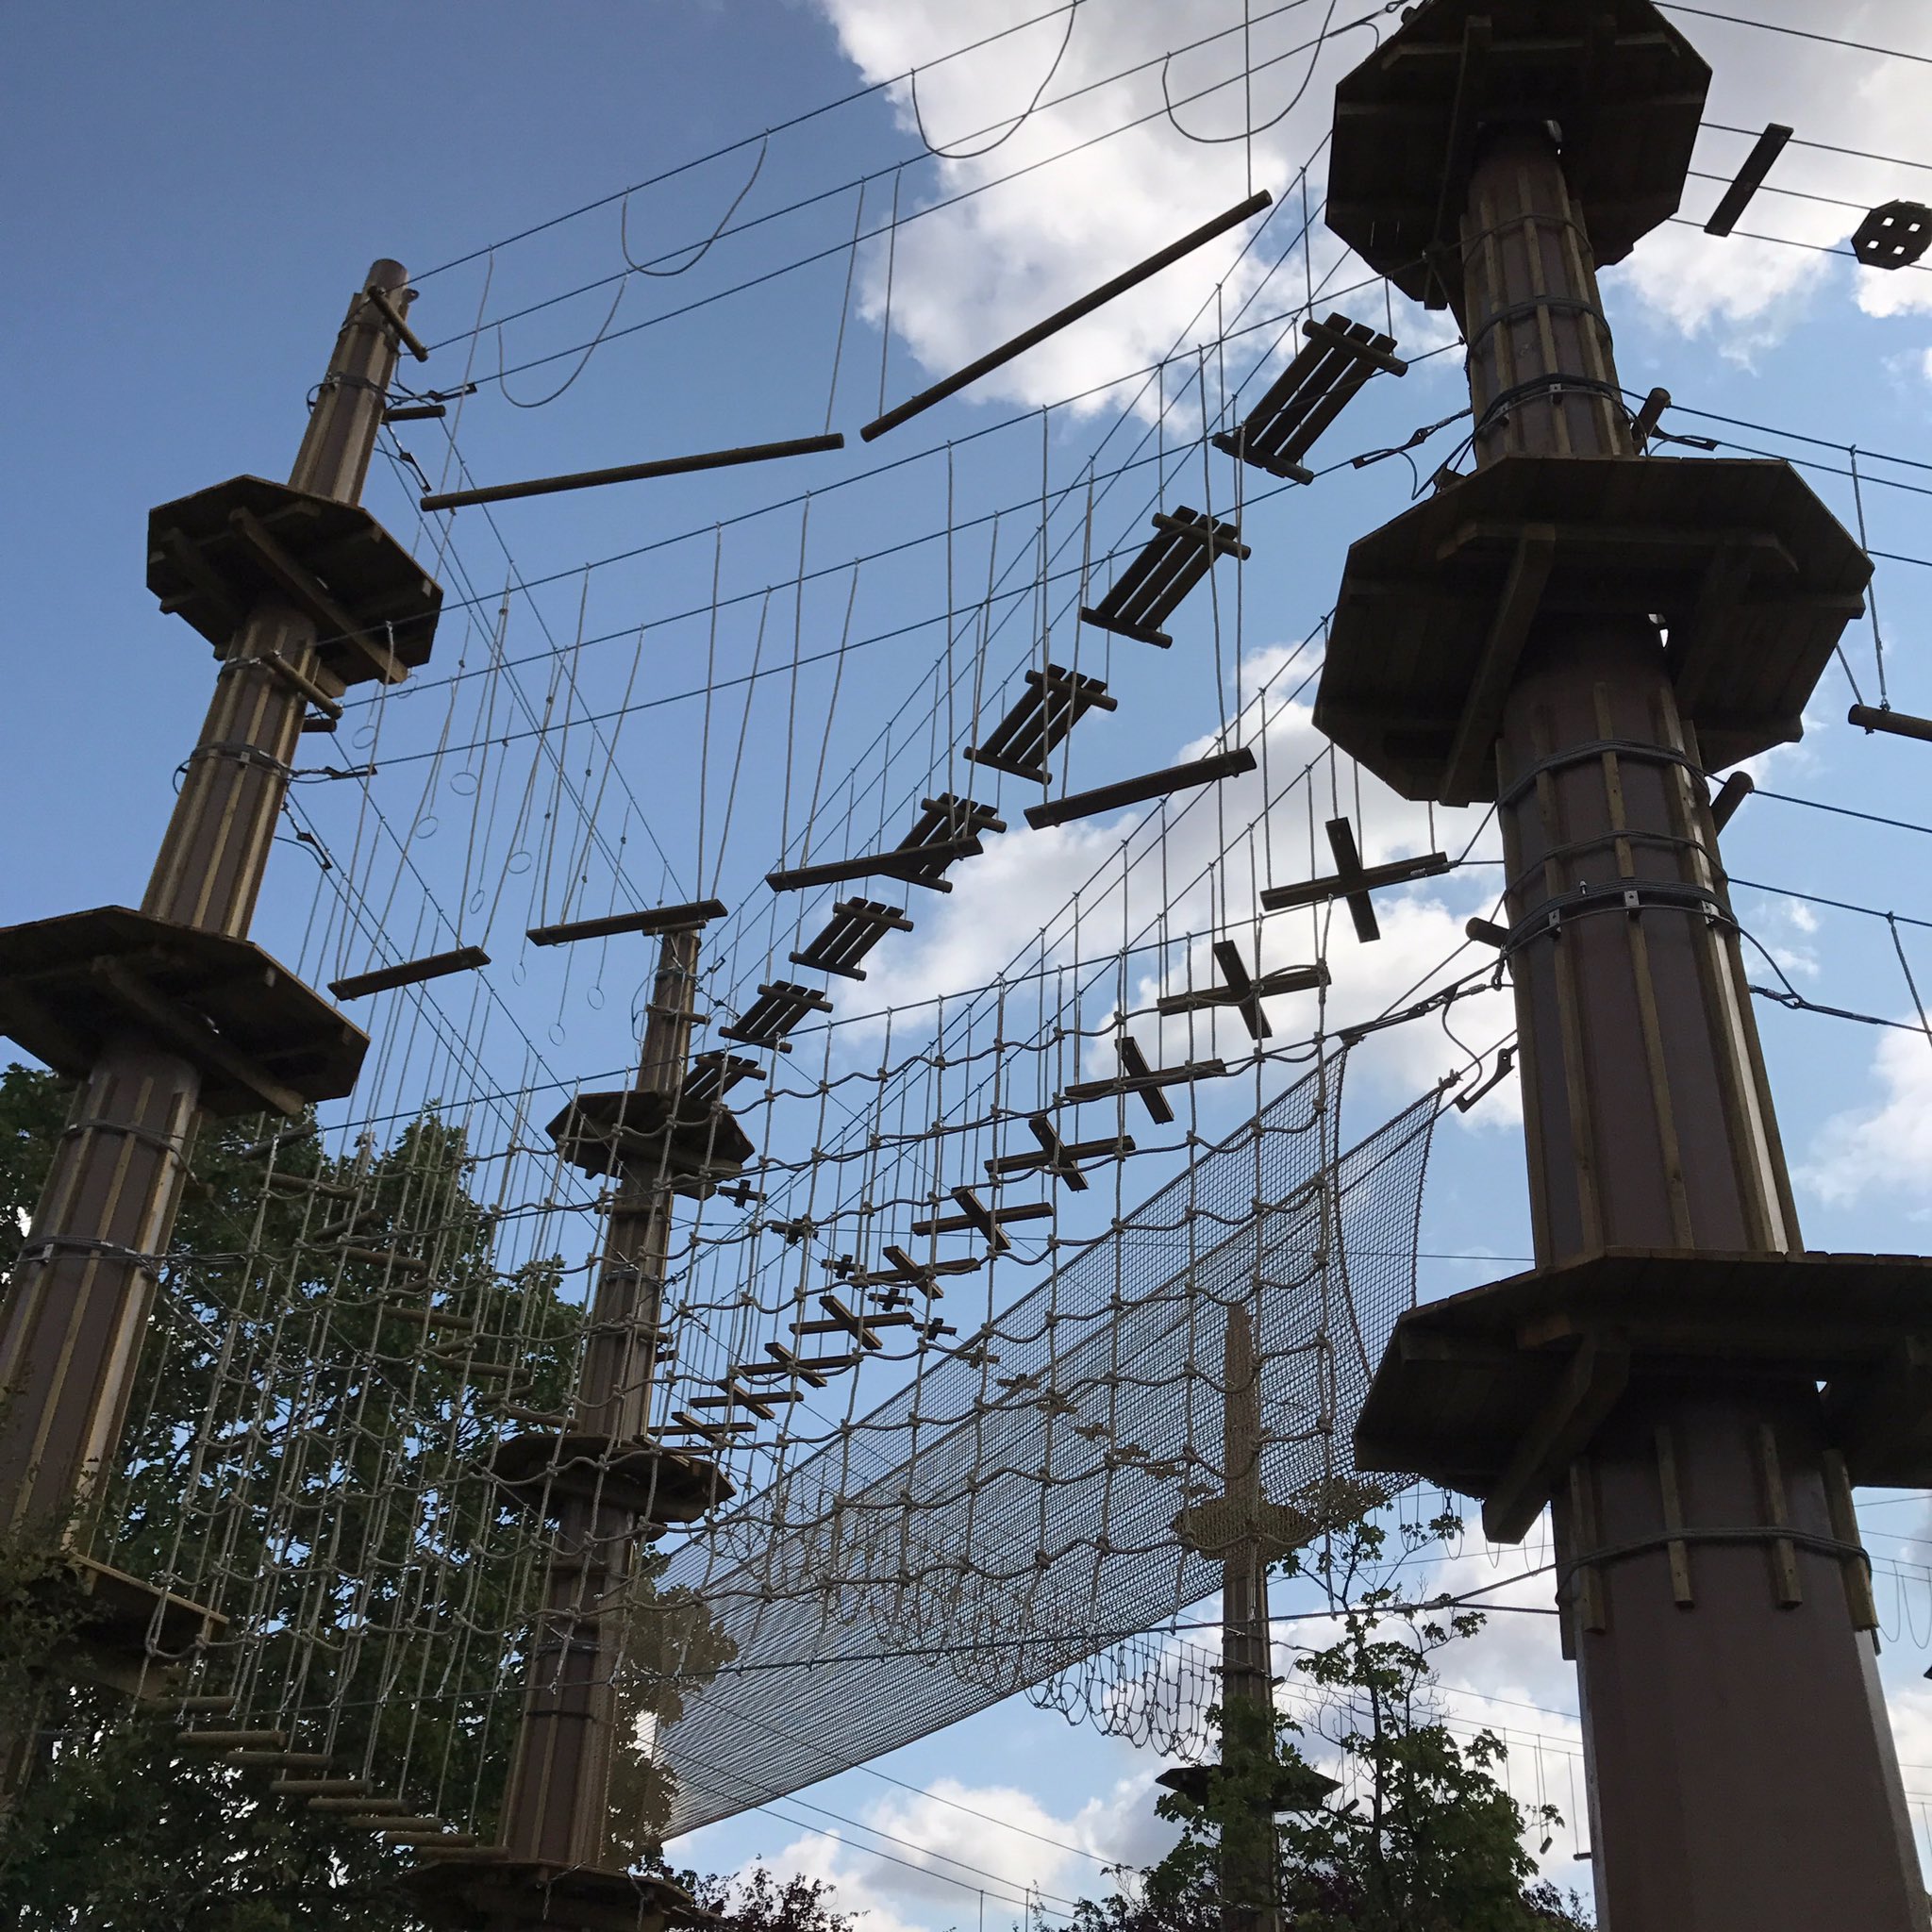 Go Ape Update The Build For Tree Top Adventure At Go Ape Alexandra Palace Continues Our Forest Doors Open This Autumn Keep Your Eyes Peeled T Co O3l340airh